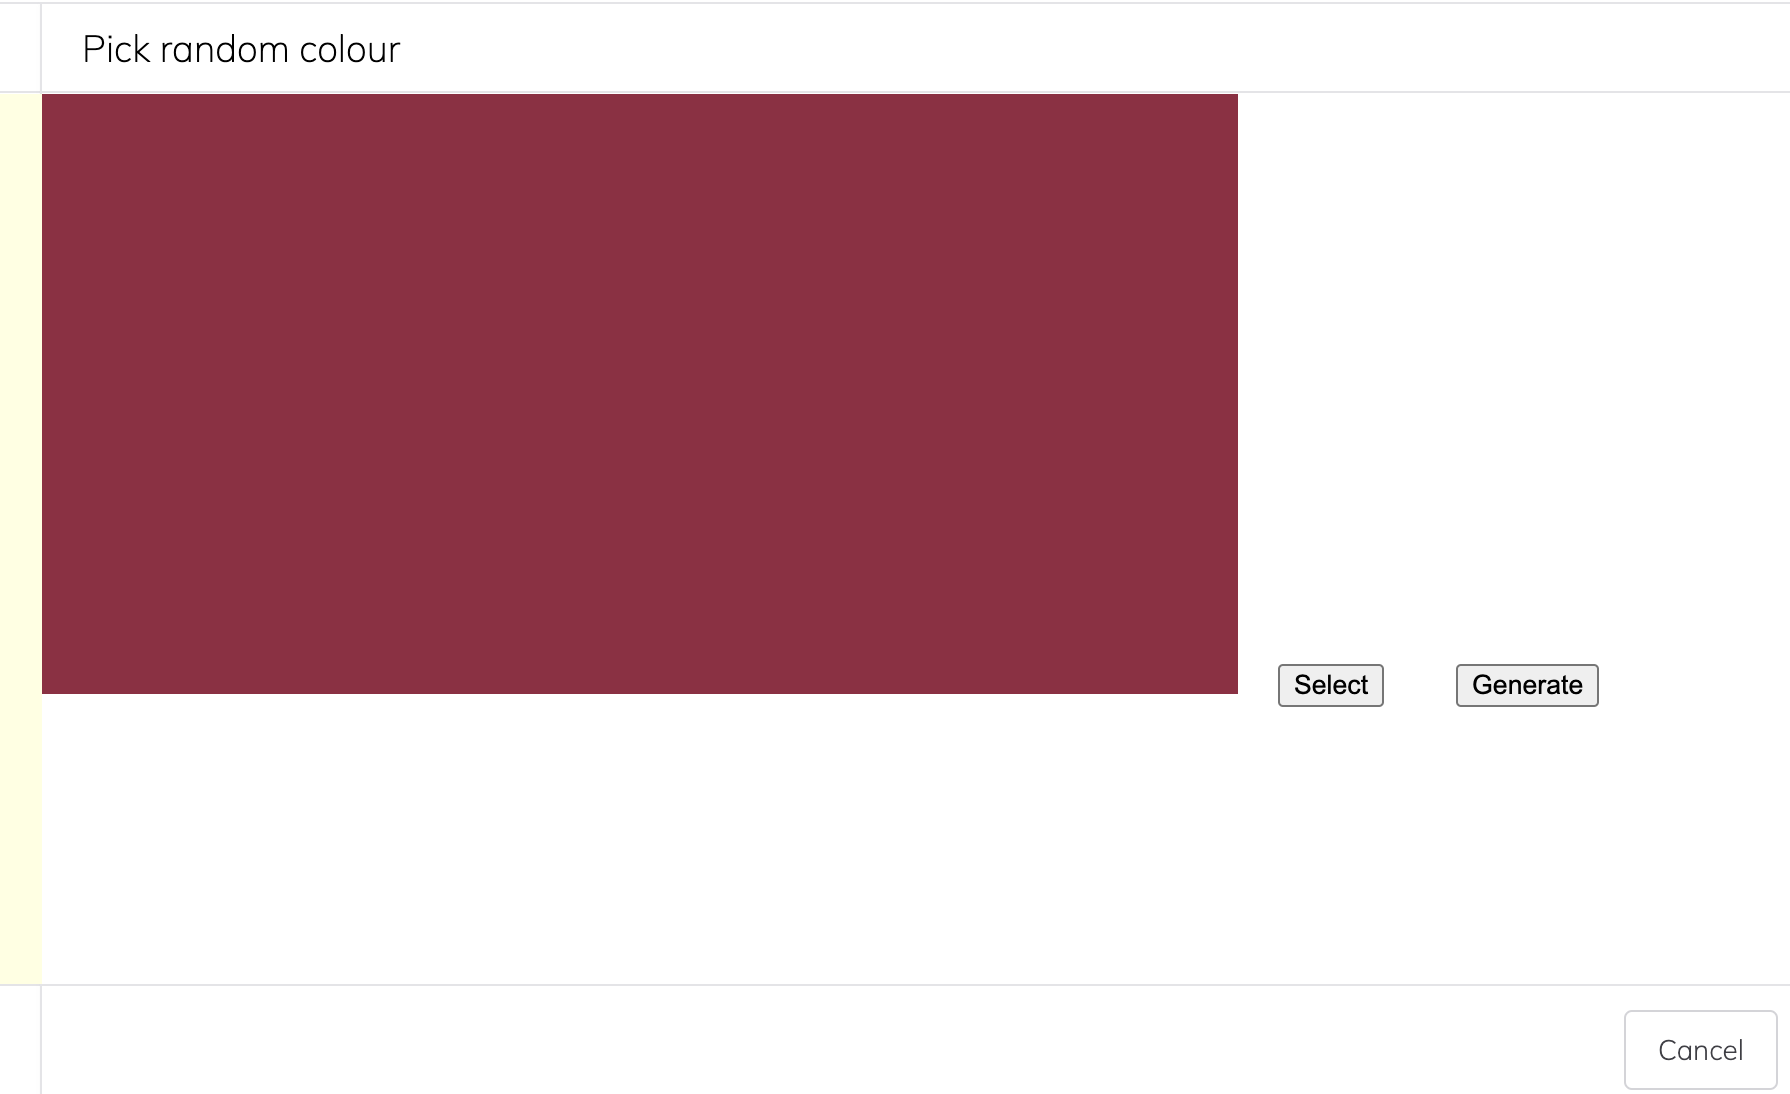 A random shade of burgundy which can be picked or regenerated